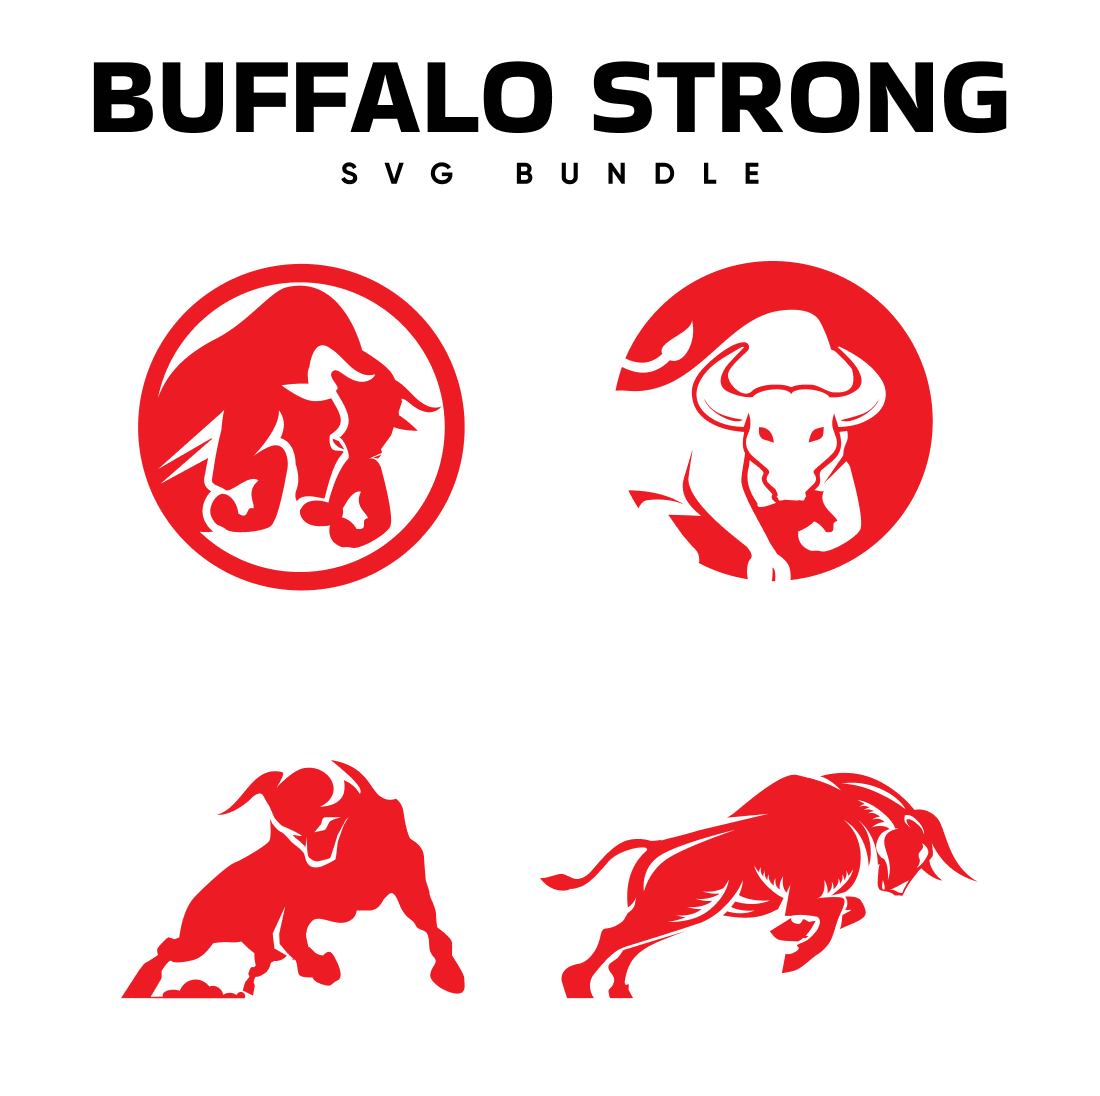 The buffalo and bull logos are red and white.